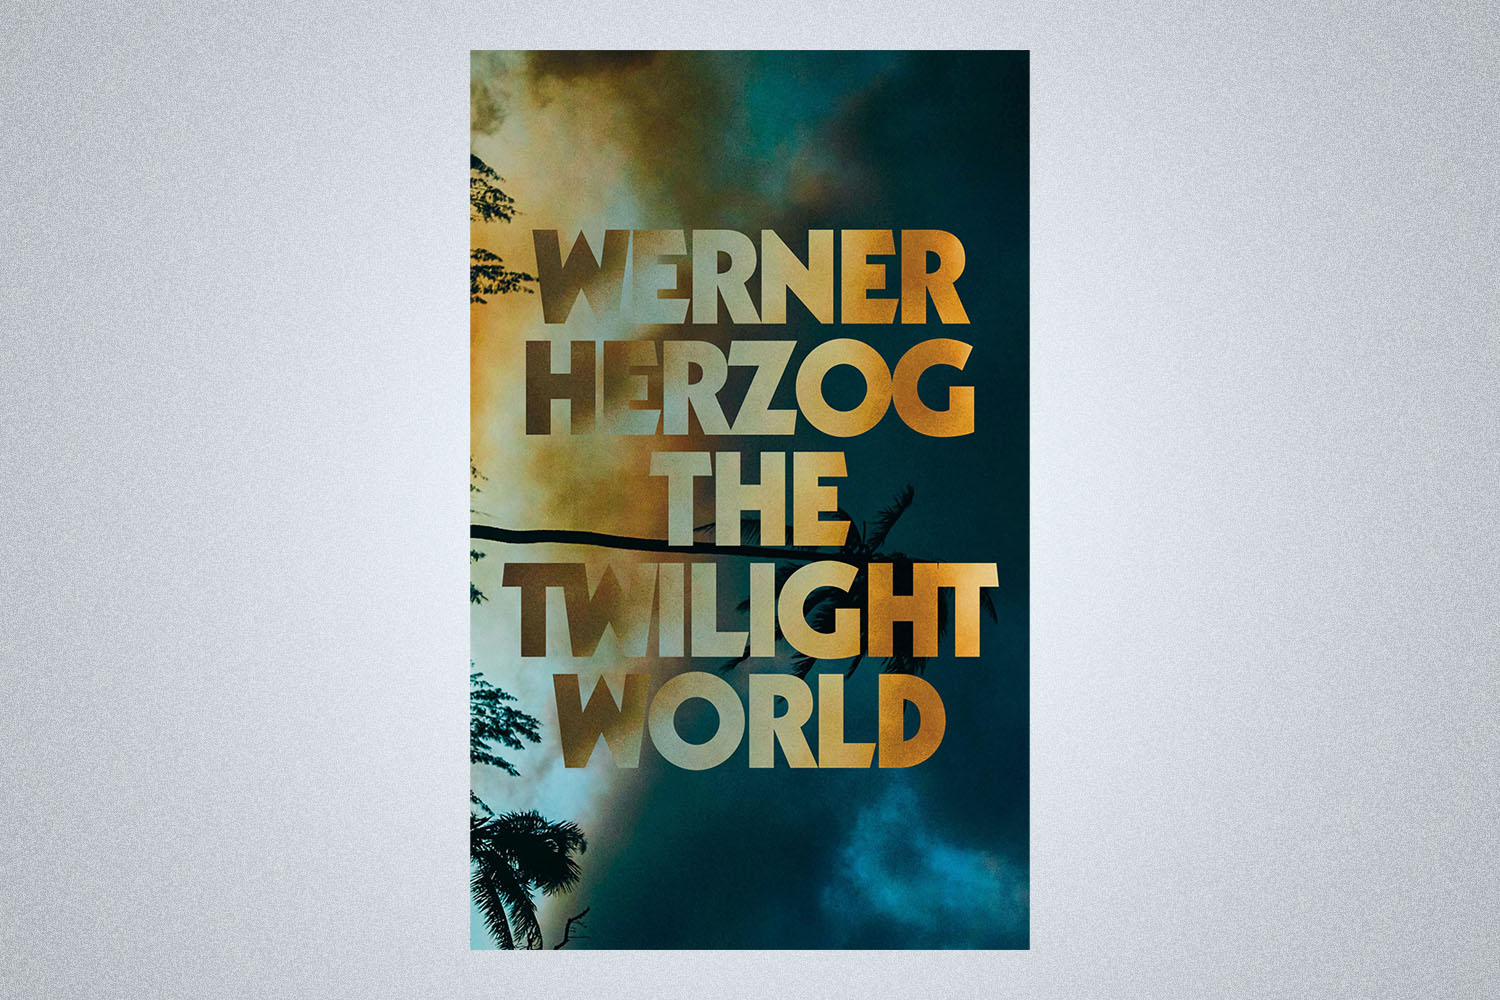 A book by Werner Herzog entitled "The Twilight World" on a grey background